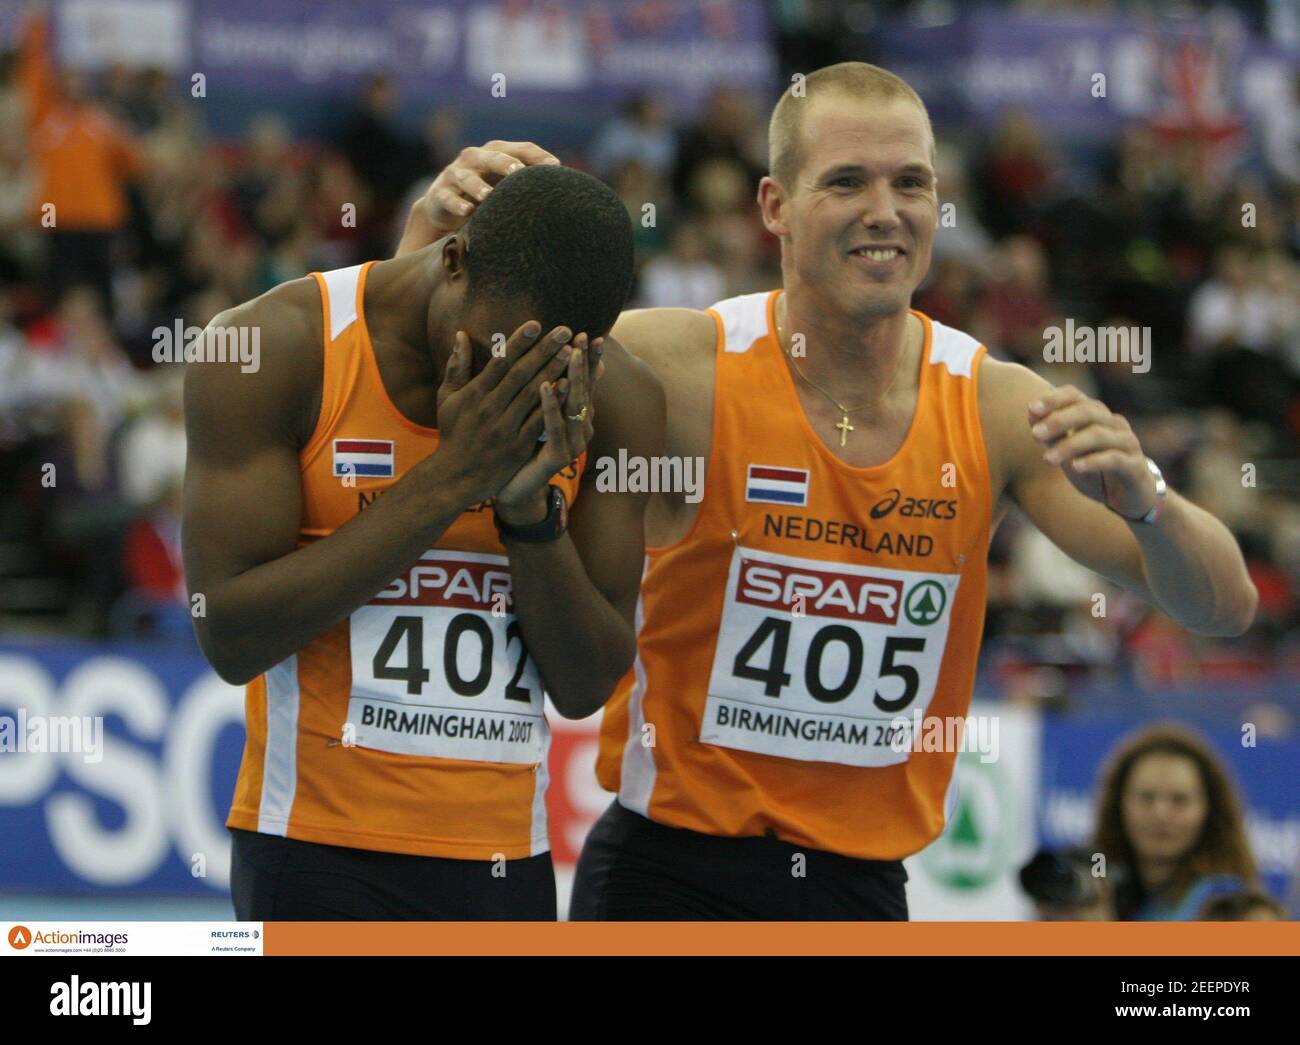 Athletics - European Indoor Athletics Championships - National Indoor Arena  - 2/3/07 Gregory Sedoc (L) of Holland is overcome with emotion after he won  the gold medal in the 60m hurdles. He